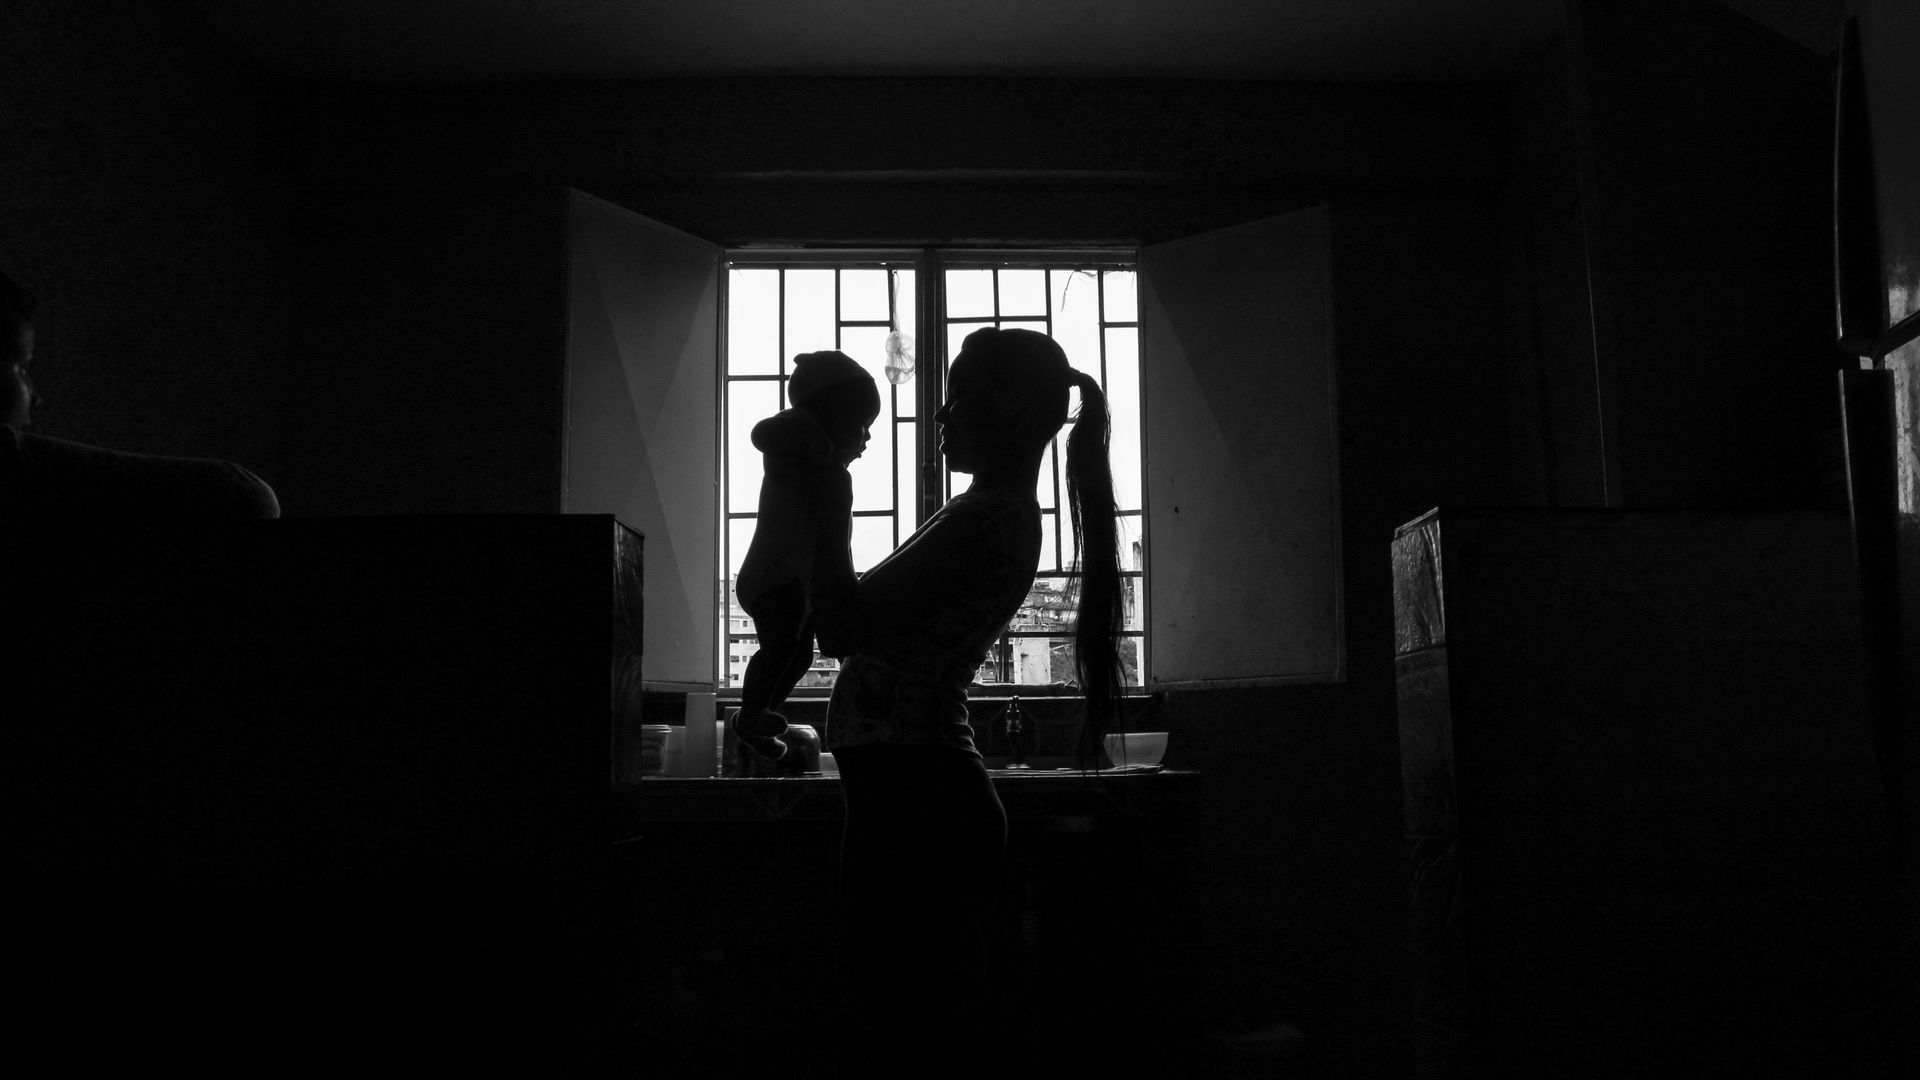 A mother holds her baby in front of a window in the shadows.